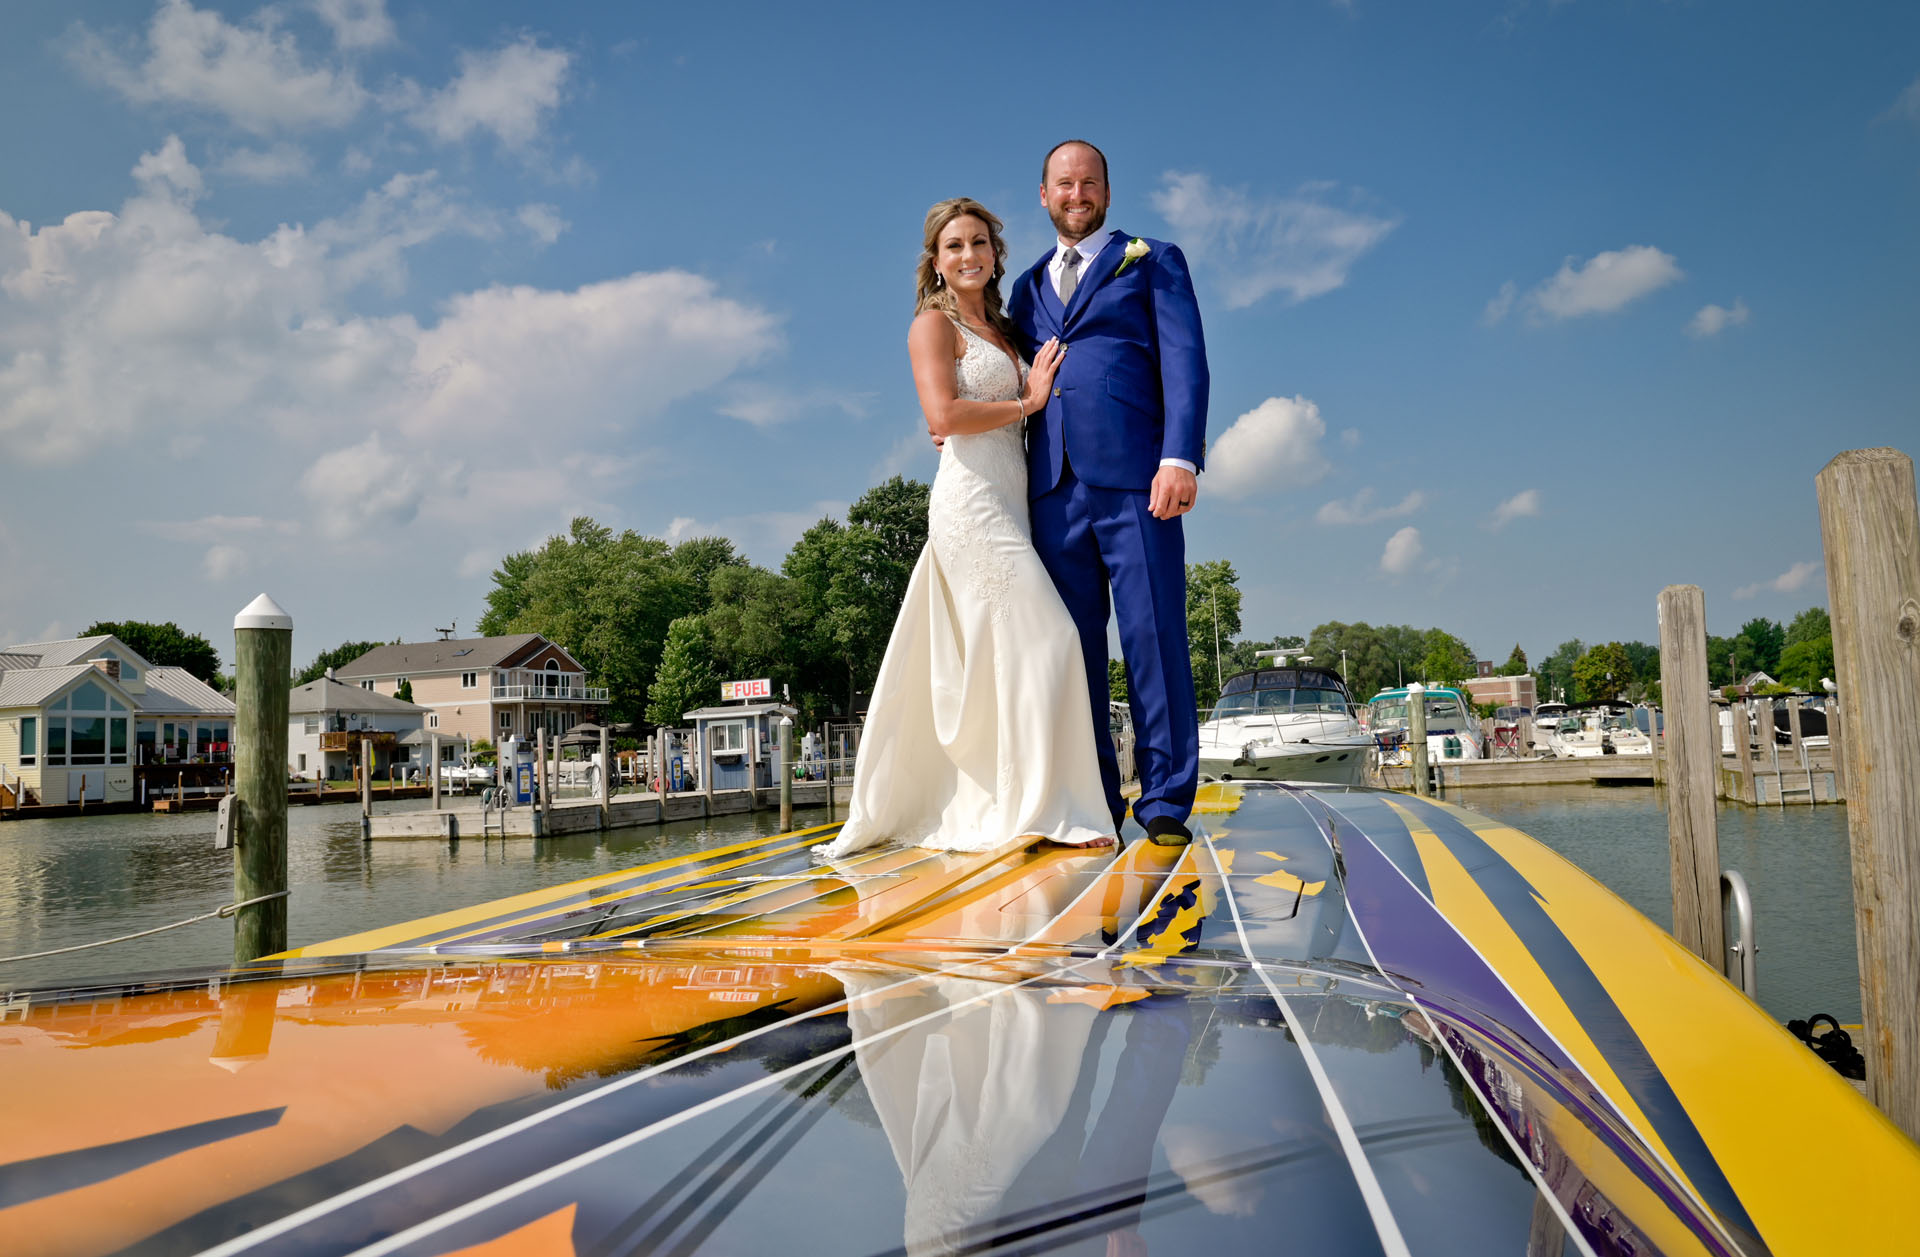 The bride and groom pose on his racing boat in St. Clair, Michigan at their docks during their wedding.